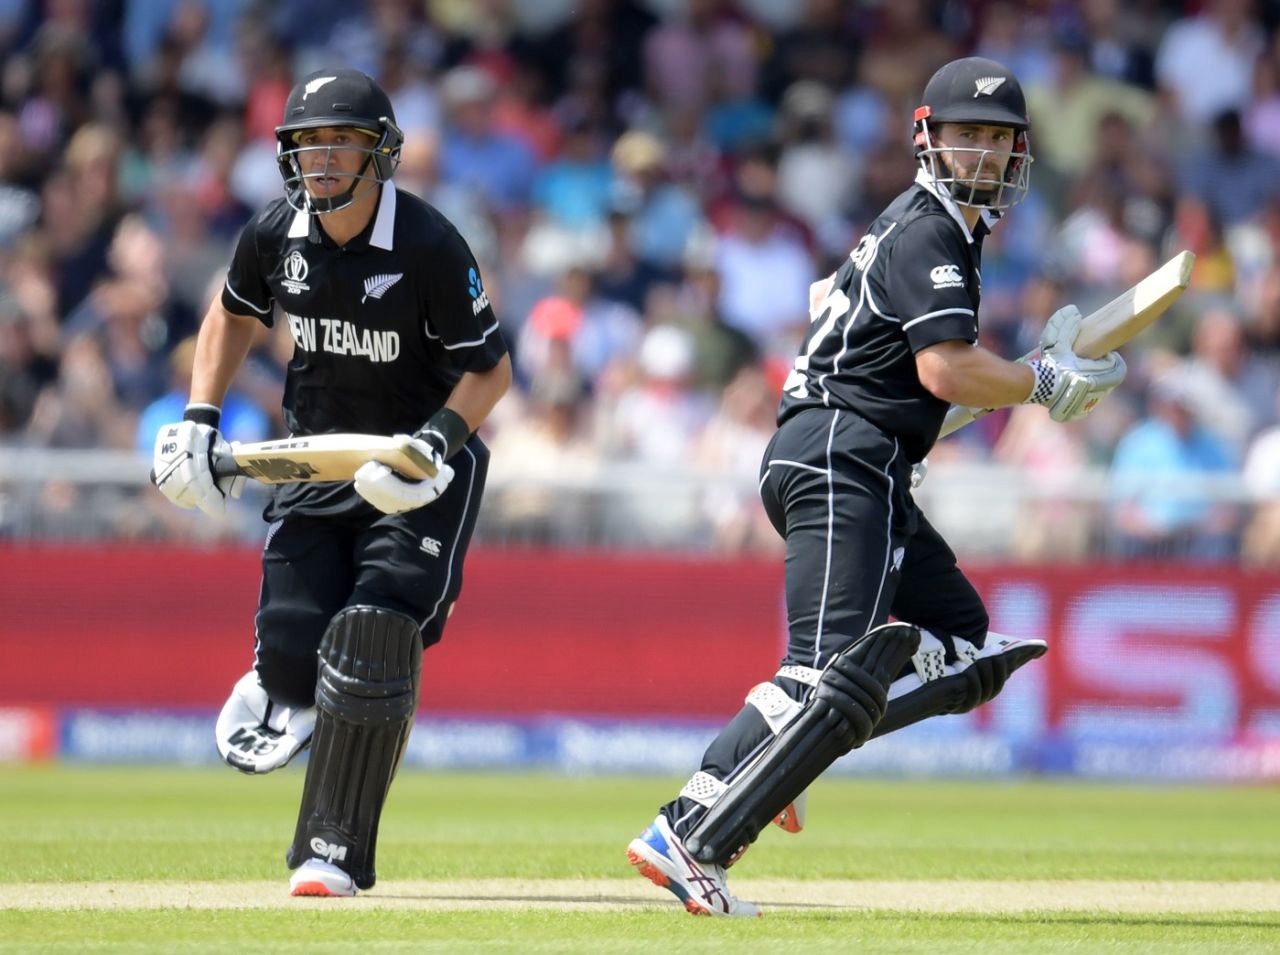 Kane Williamson and Ross Taylor take a run, New Zealand v West Indies, World Cup 2019, Manchester, June 22, 2019